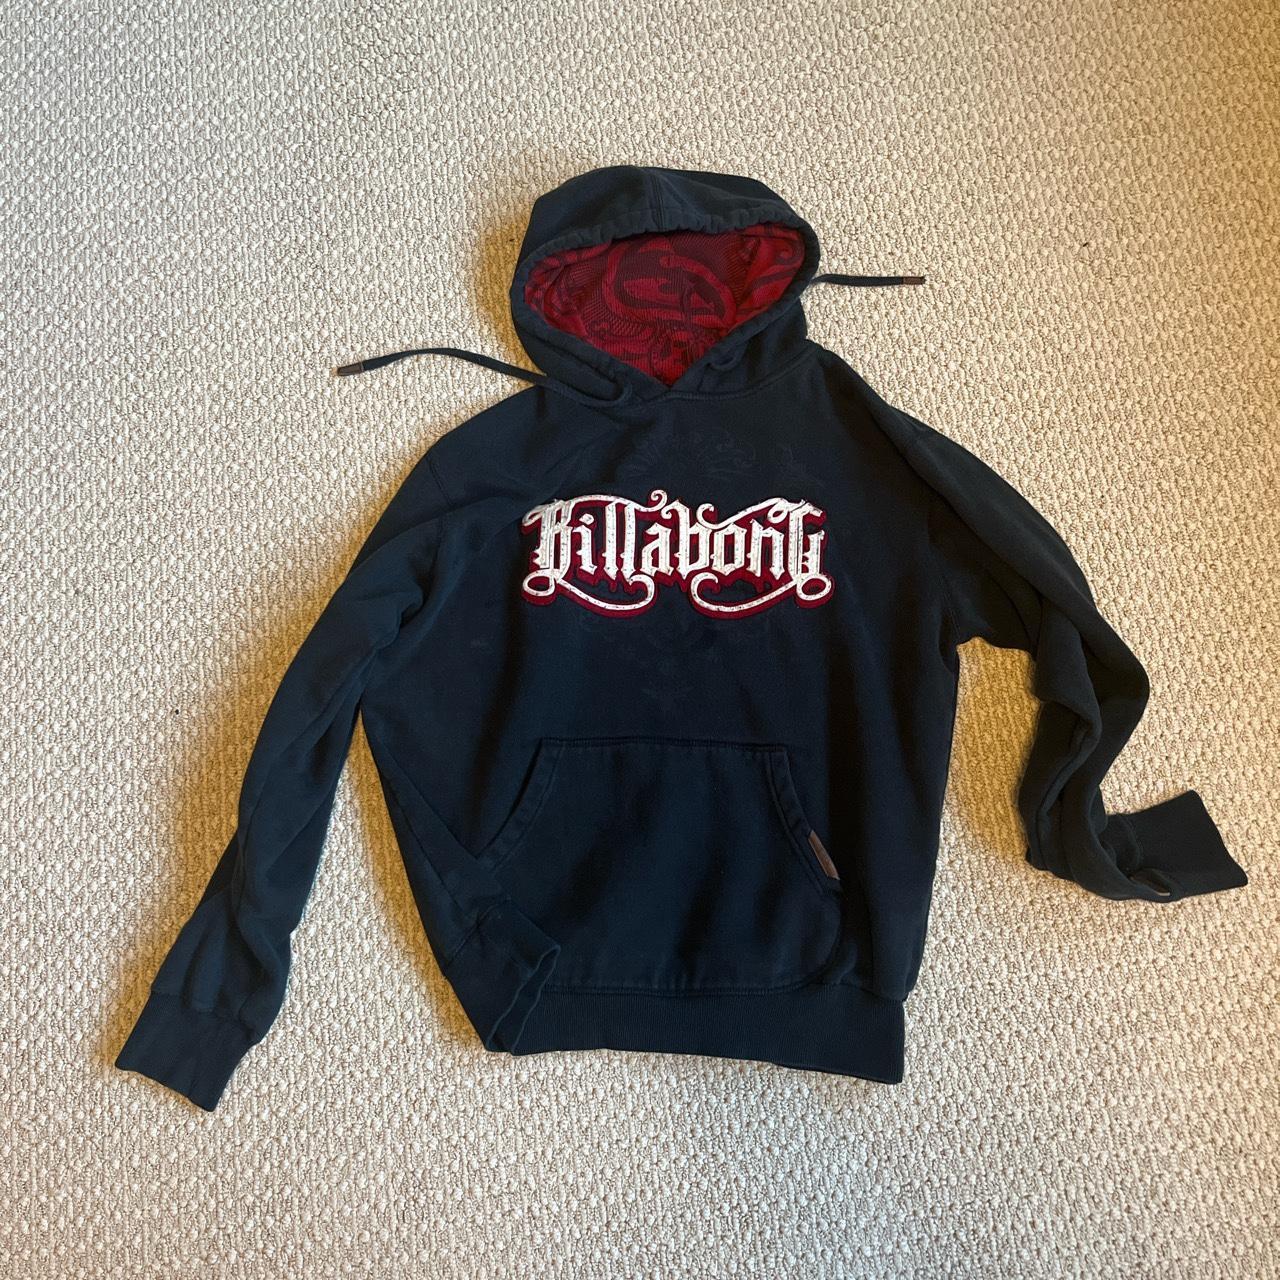 billabong affliction style hoodie Good conditions, a... - Depop